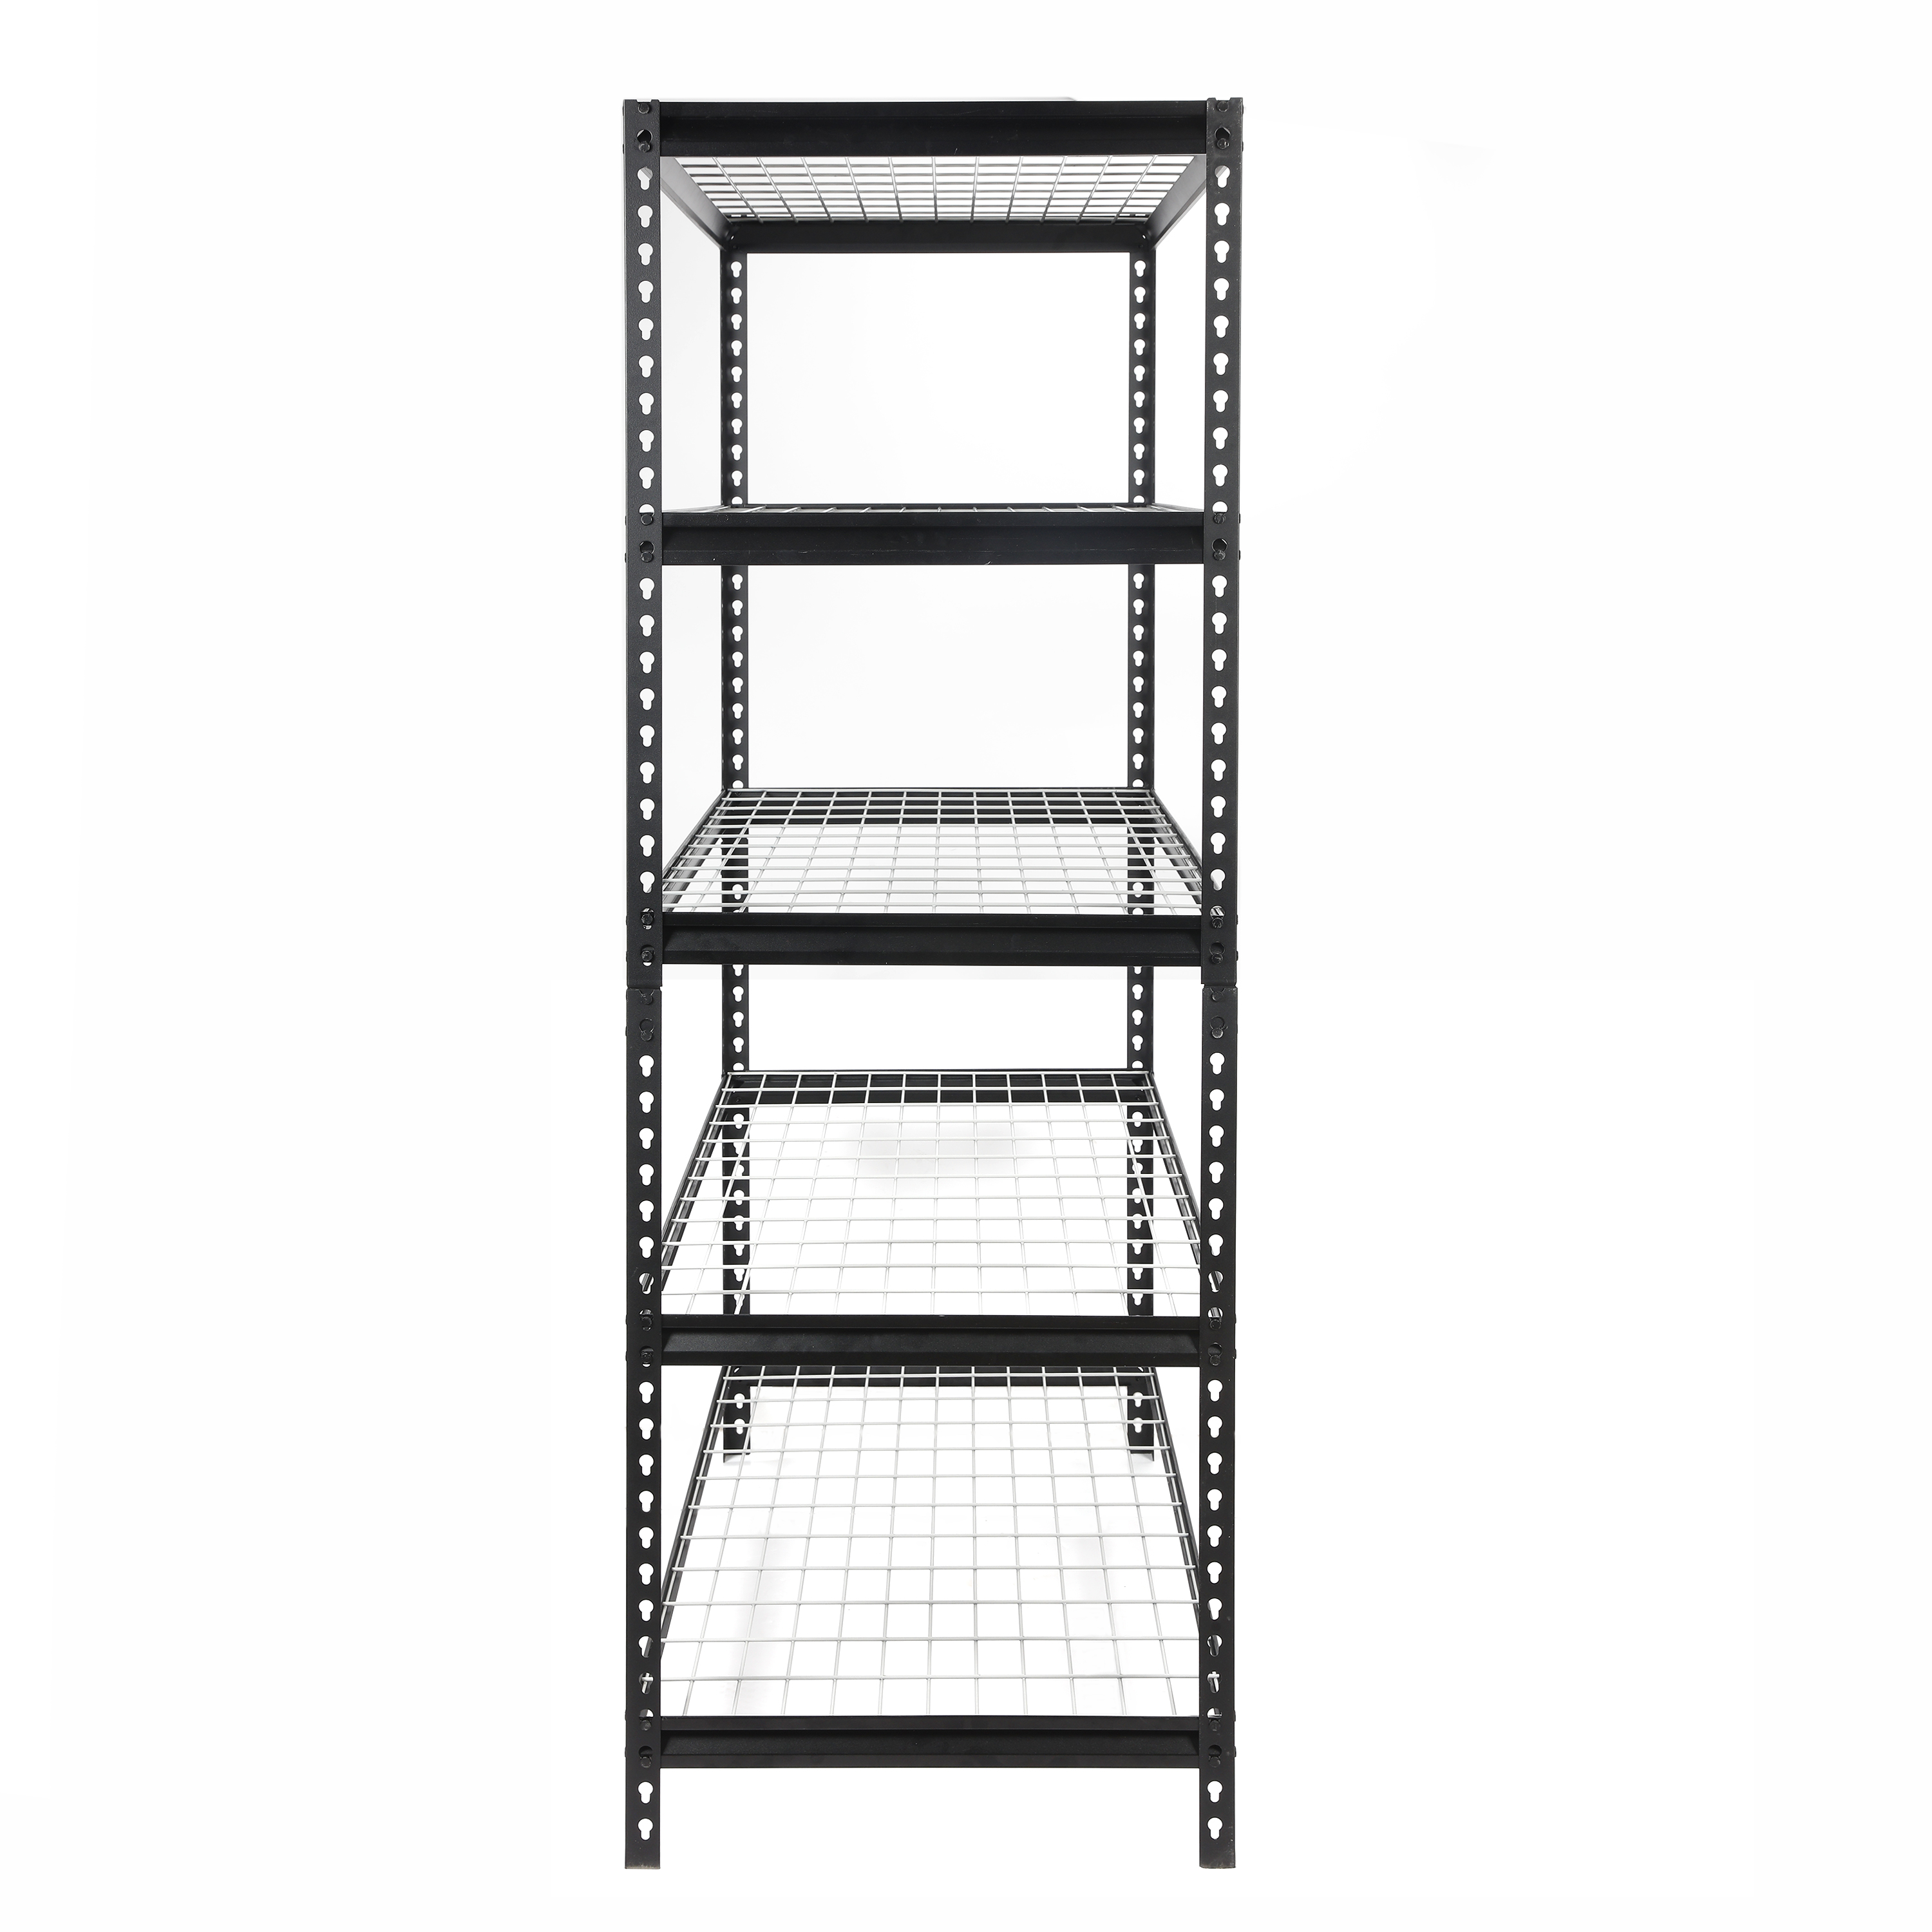 WORKPRO 48-Inch W x 24-Inch D x 72-Inch H 5-Shelf Freestanding Shelves, 4000 lbs. Capacity, Adult - image 4 of 11